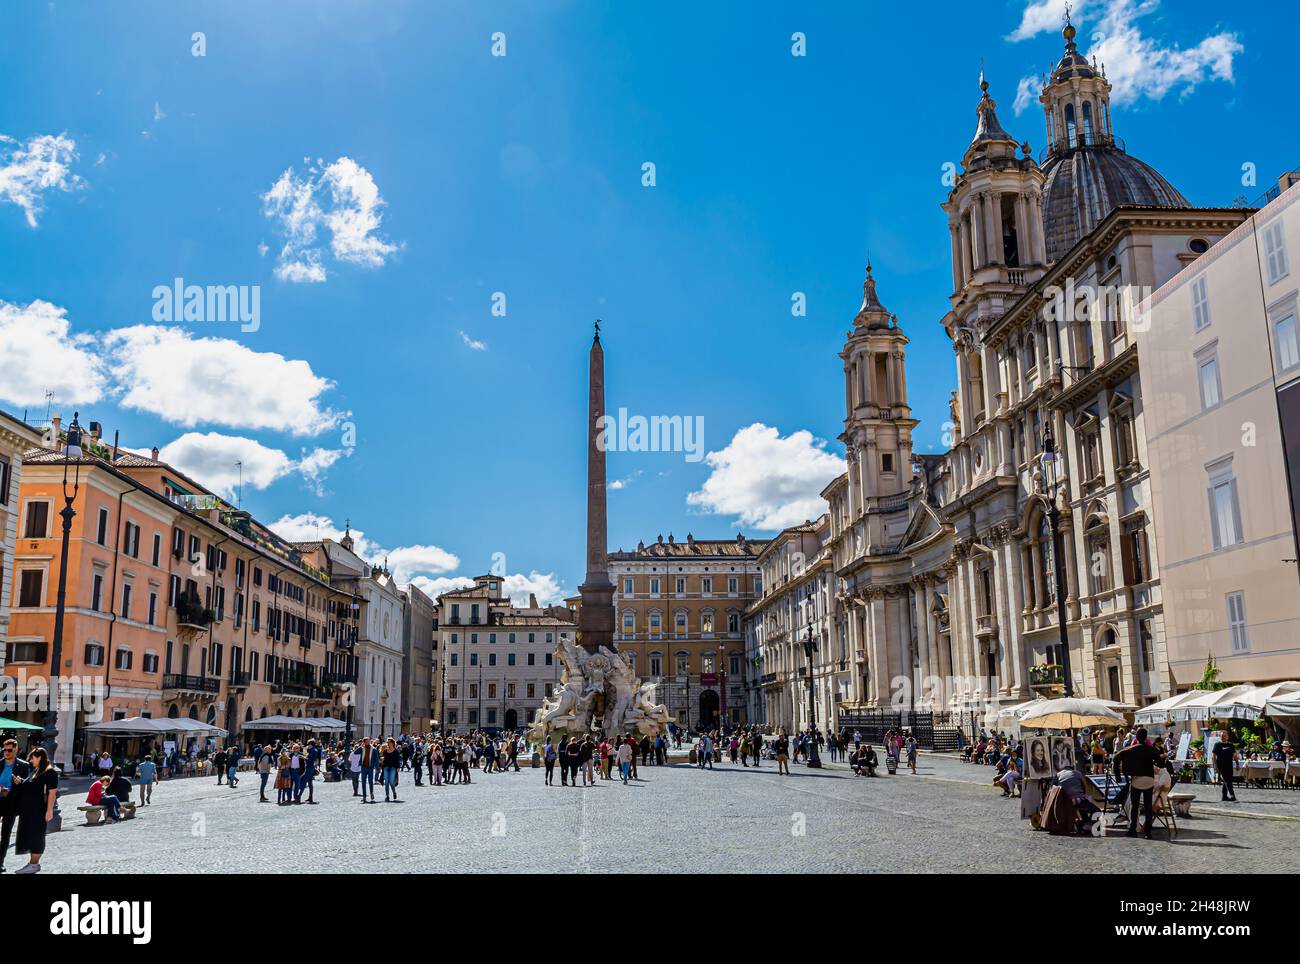 Piazza Navona is one of the most famous monumental squares in Rome ...